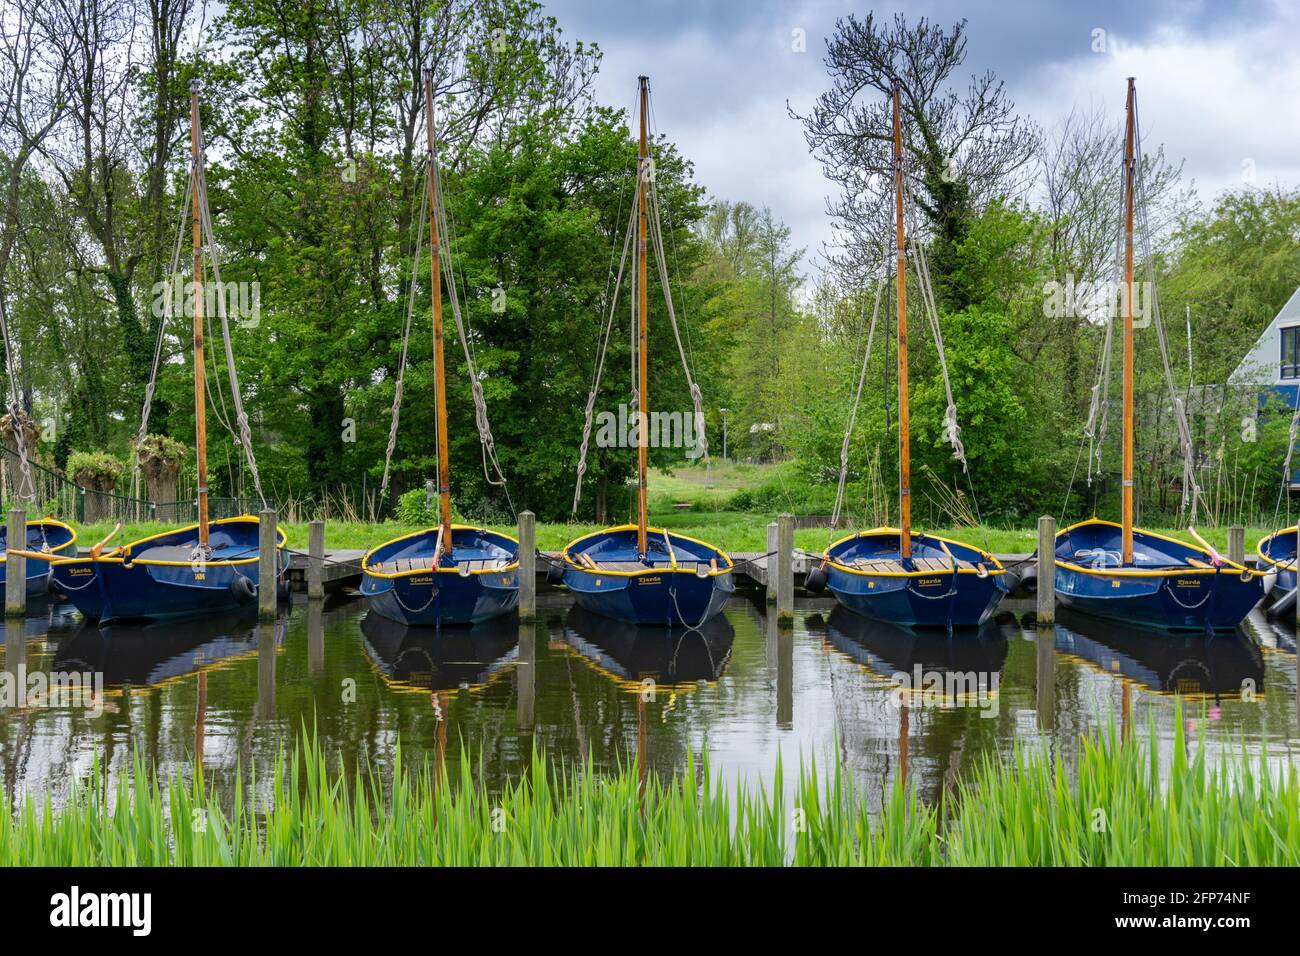 Sassenheim, Netherlands - 16 May, 2021: yellow and blue sailboats anchored in a row in a canal in southern Holland Stock Photo